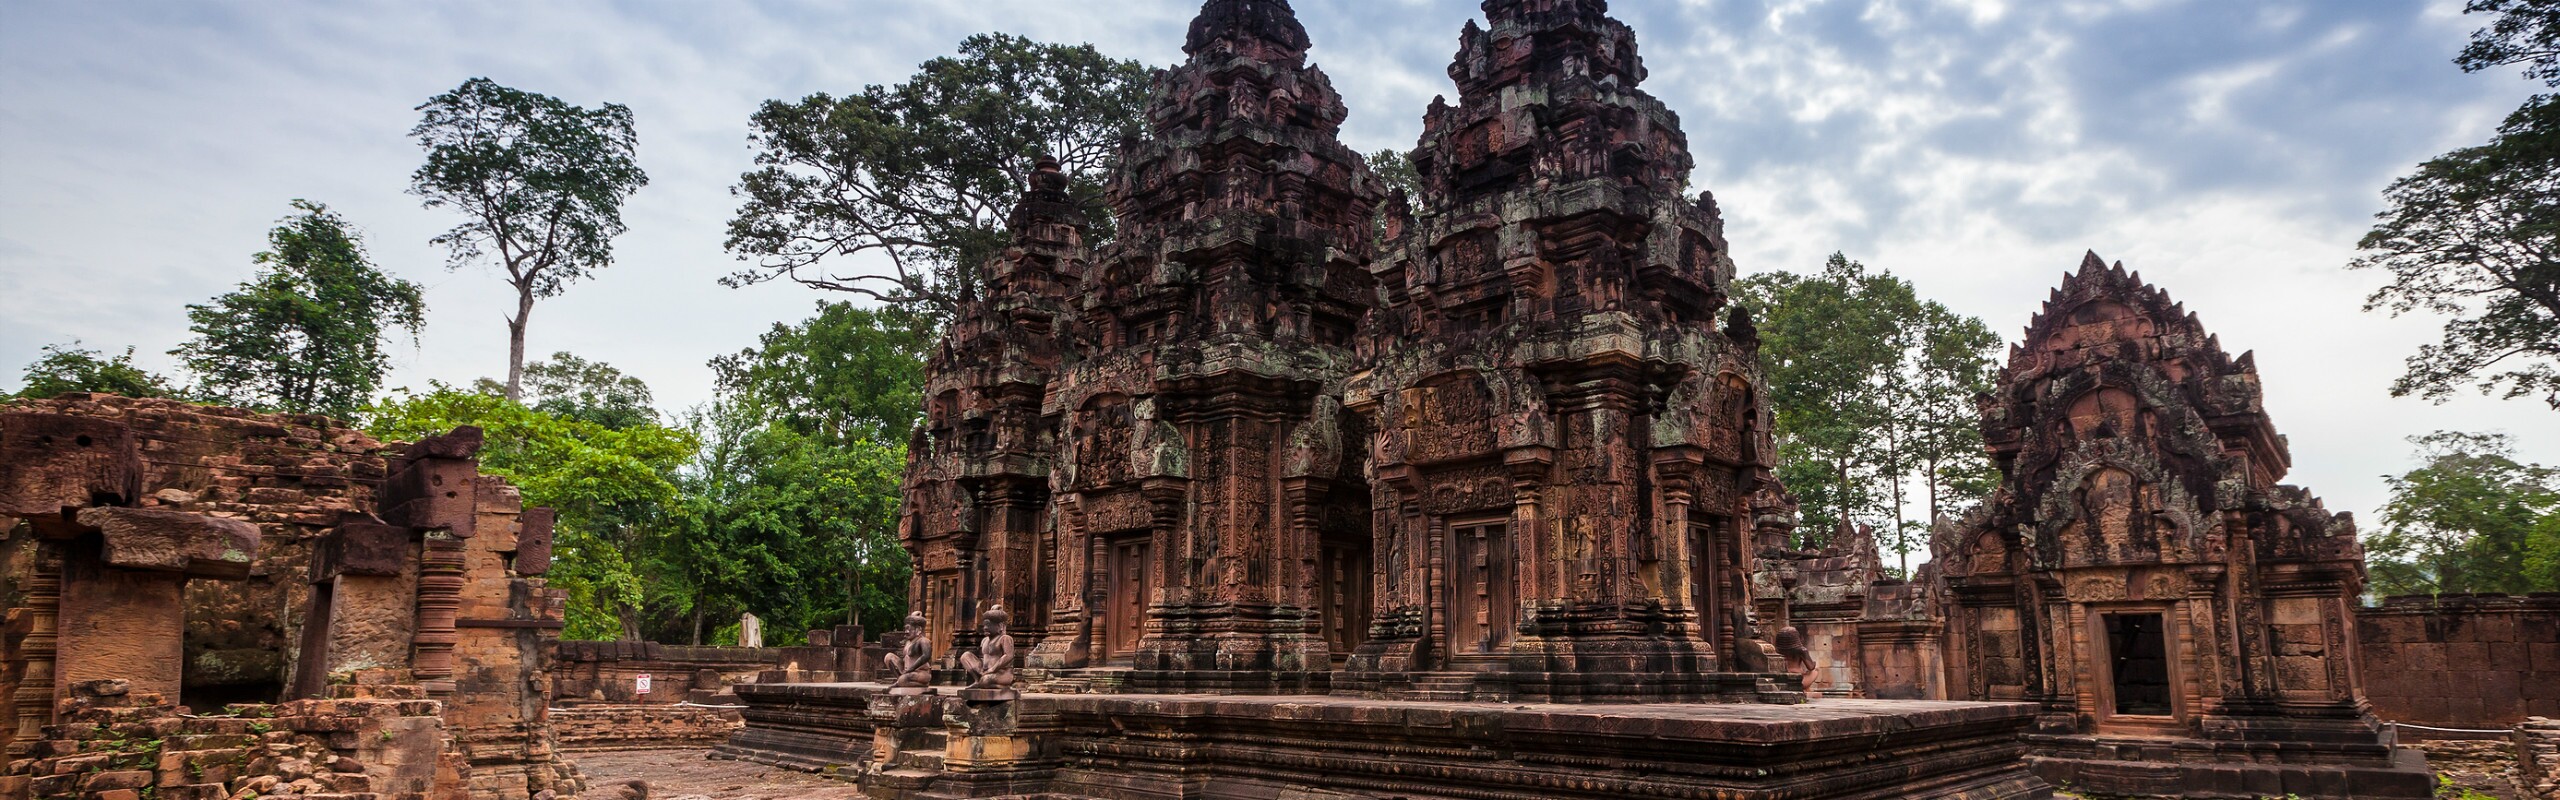 Top Attractions in Cambodia 